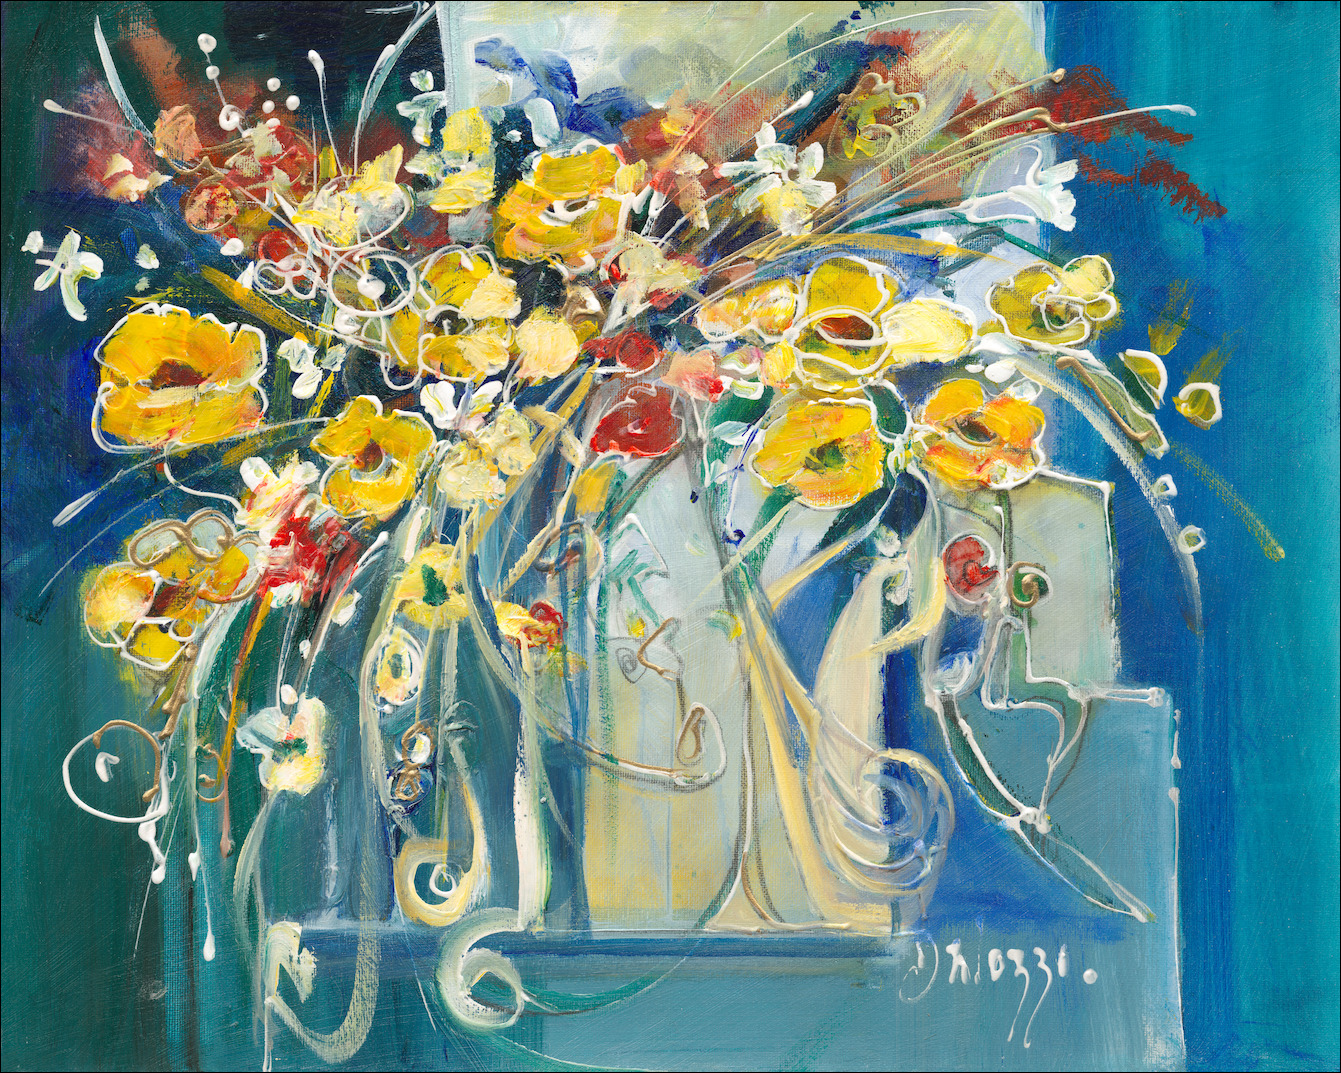 Floral Still Life Painting "Artistic Bouquet" by Lucette Dalozzo